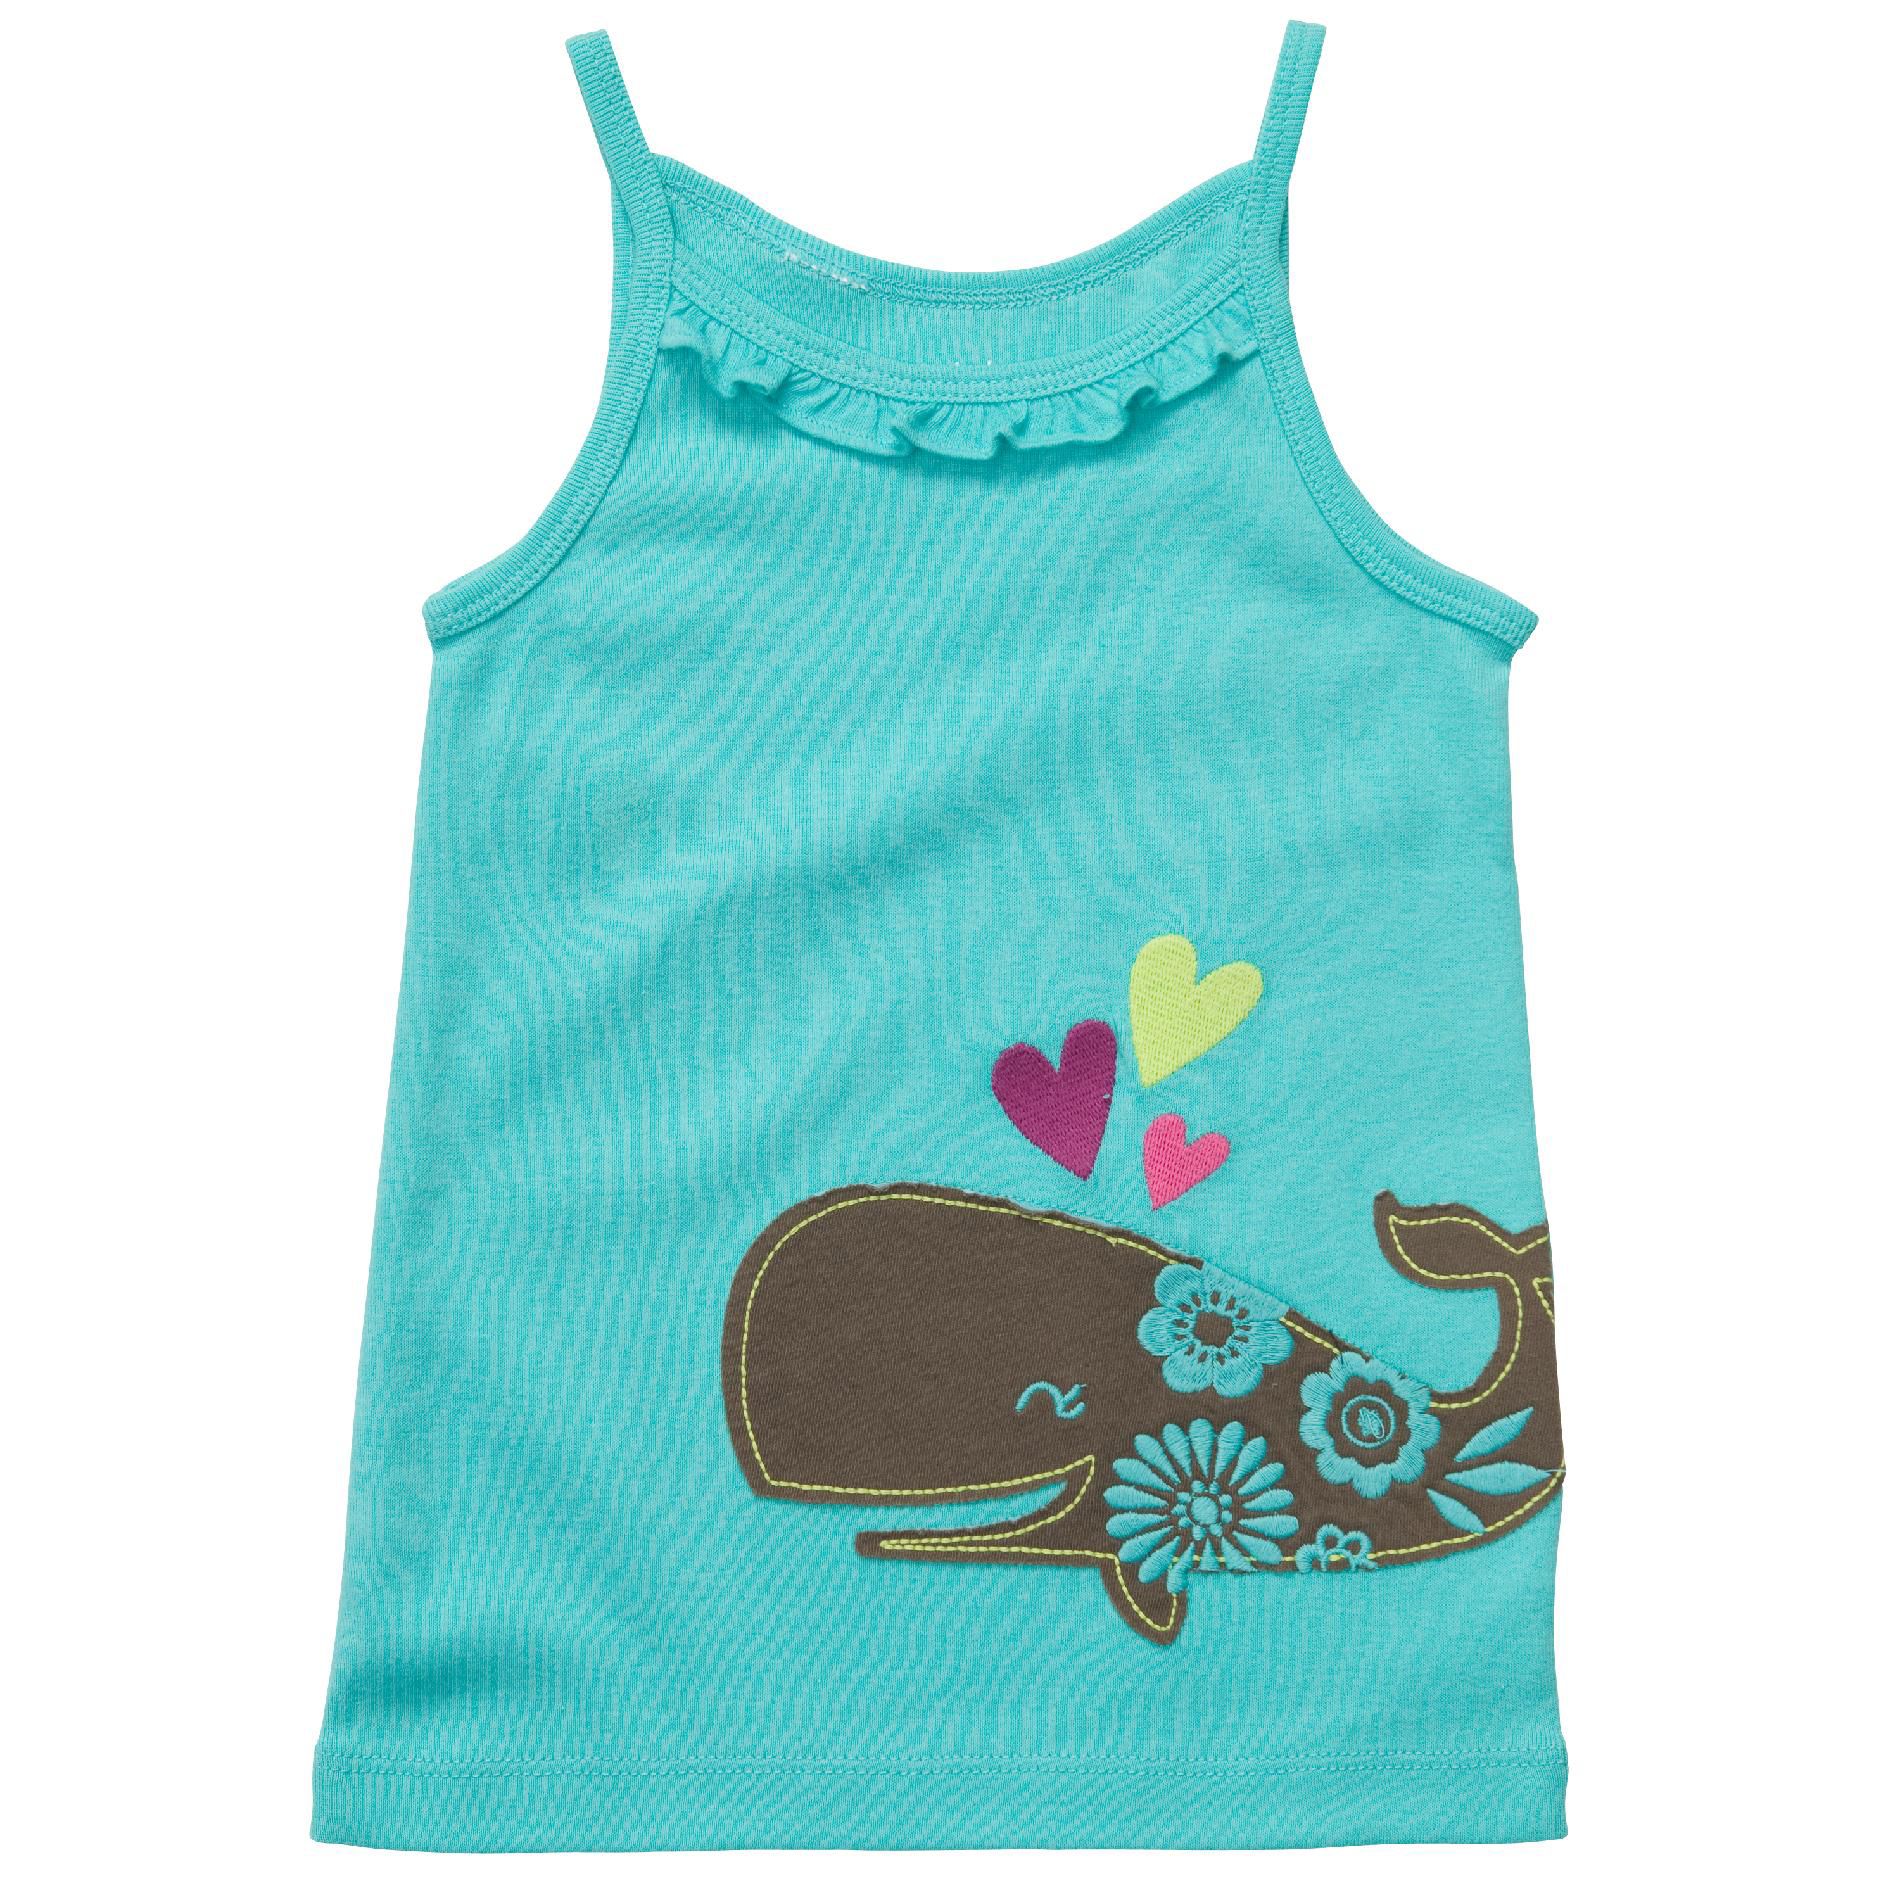 Carter's Girl's Top Knit Whale